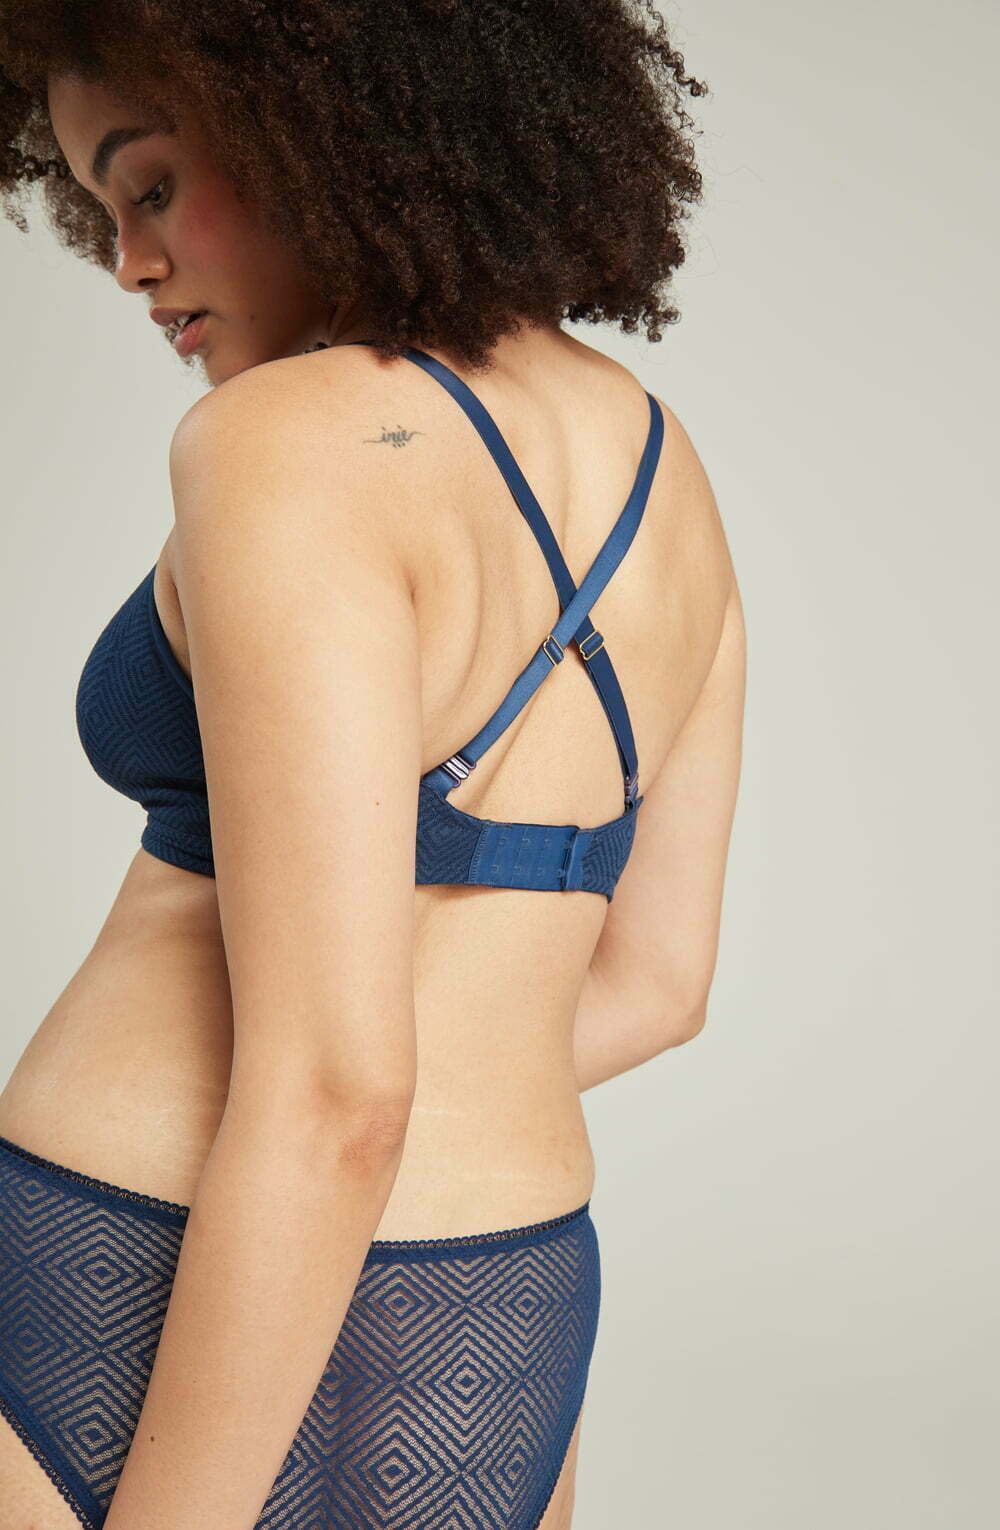 The Sheer Deco Easy Does It Bralette Navy Up to G Cup